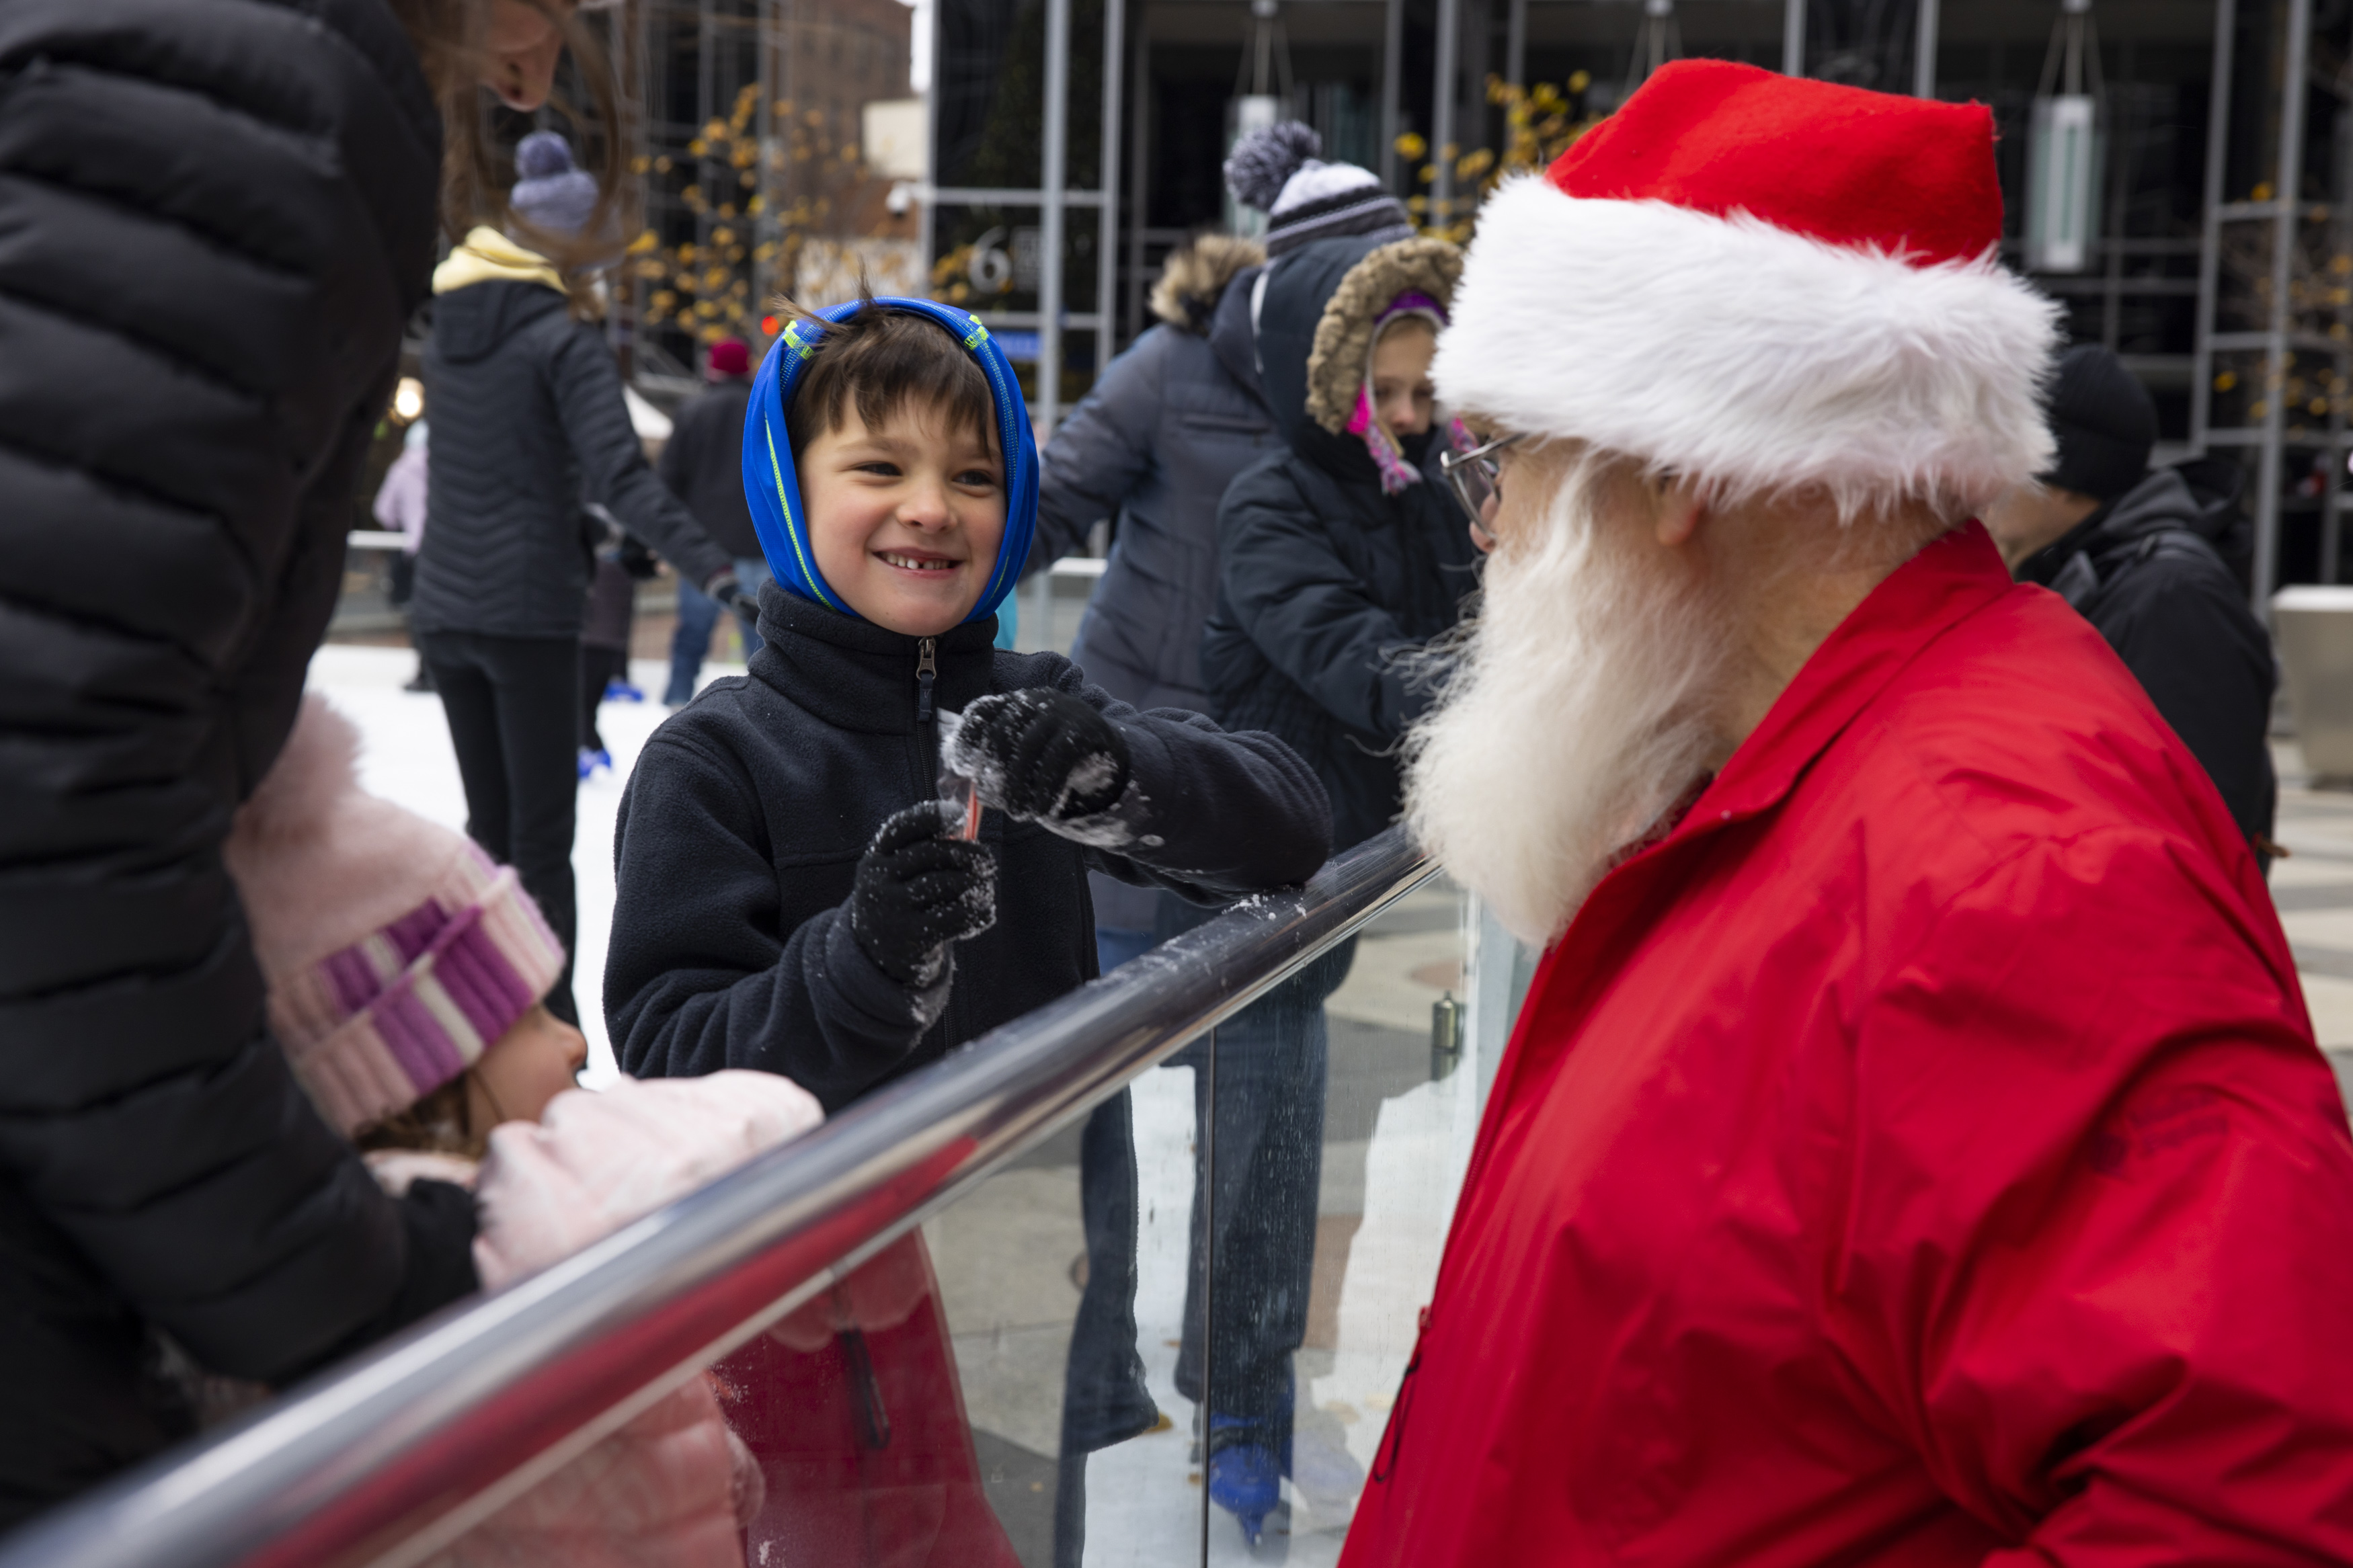 Ken Barker, an older, white man is dressed in a red Santa suit, talks to children at an outdoor ice skating rink. 